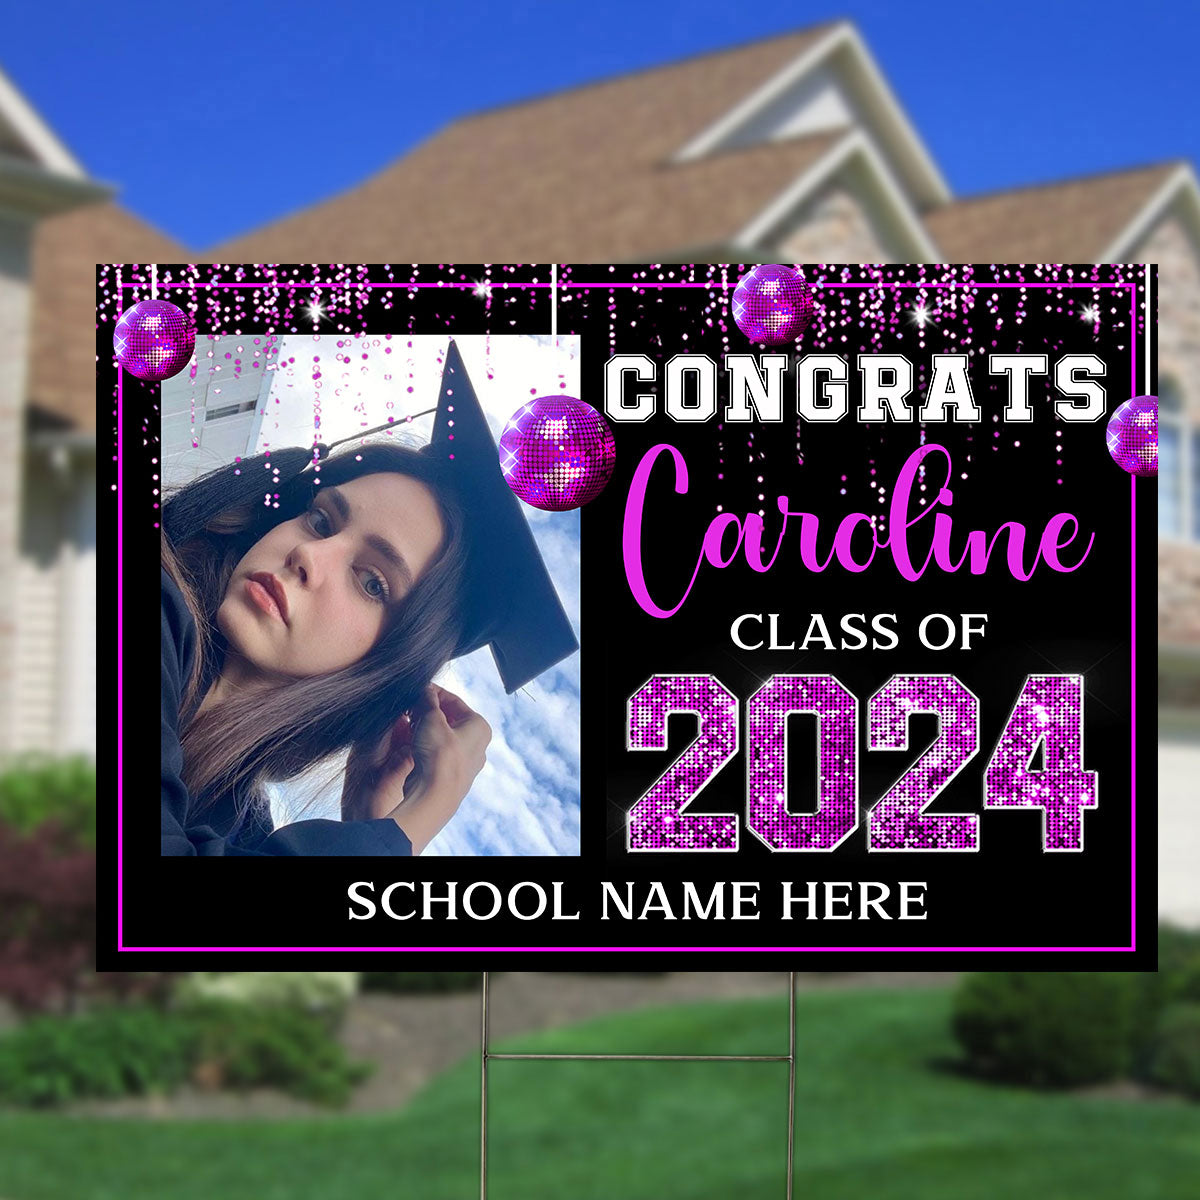 Congrats Class Of 2024 Custom Background, Quote, Photo And Texts - Personalized Lawn Sign, Yard Sign, Gift For Graduation